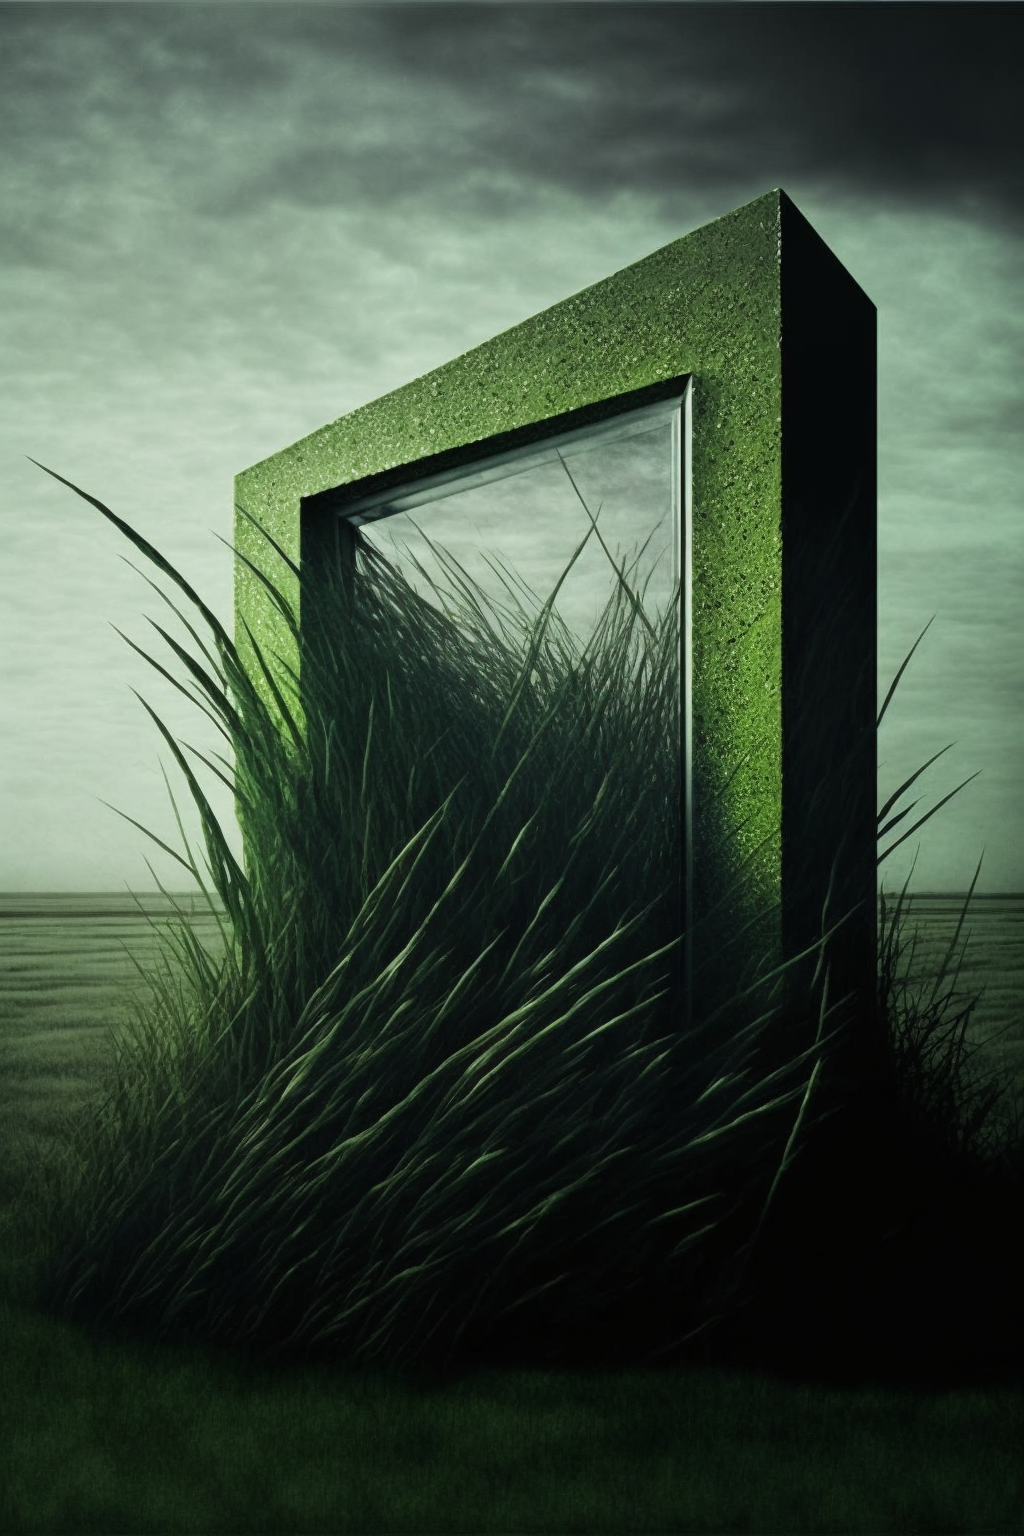 Grass in the style of Surrealist-Socialist Post-Modern Classicism 2